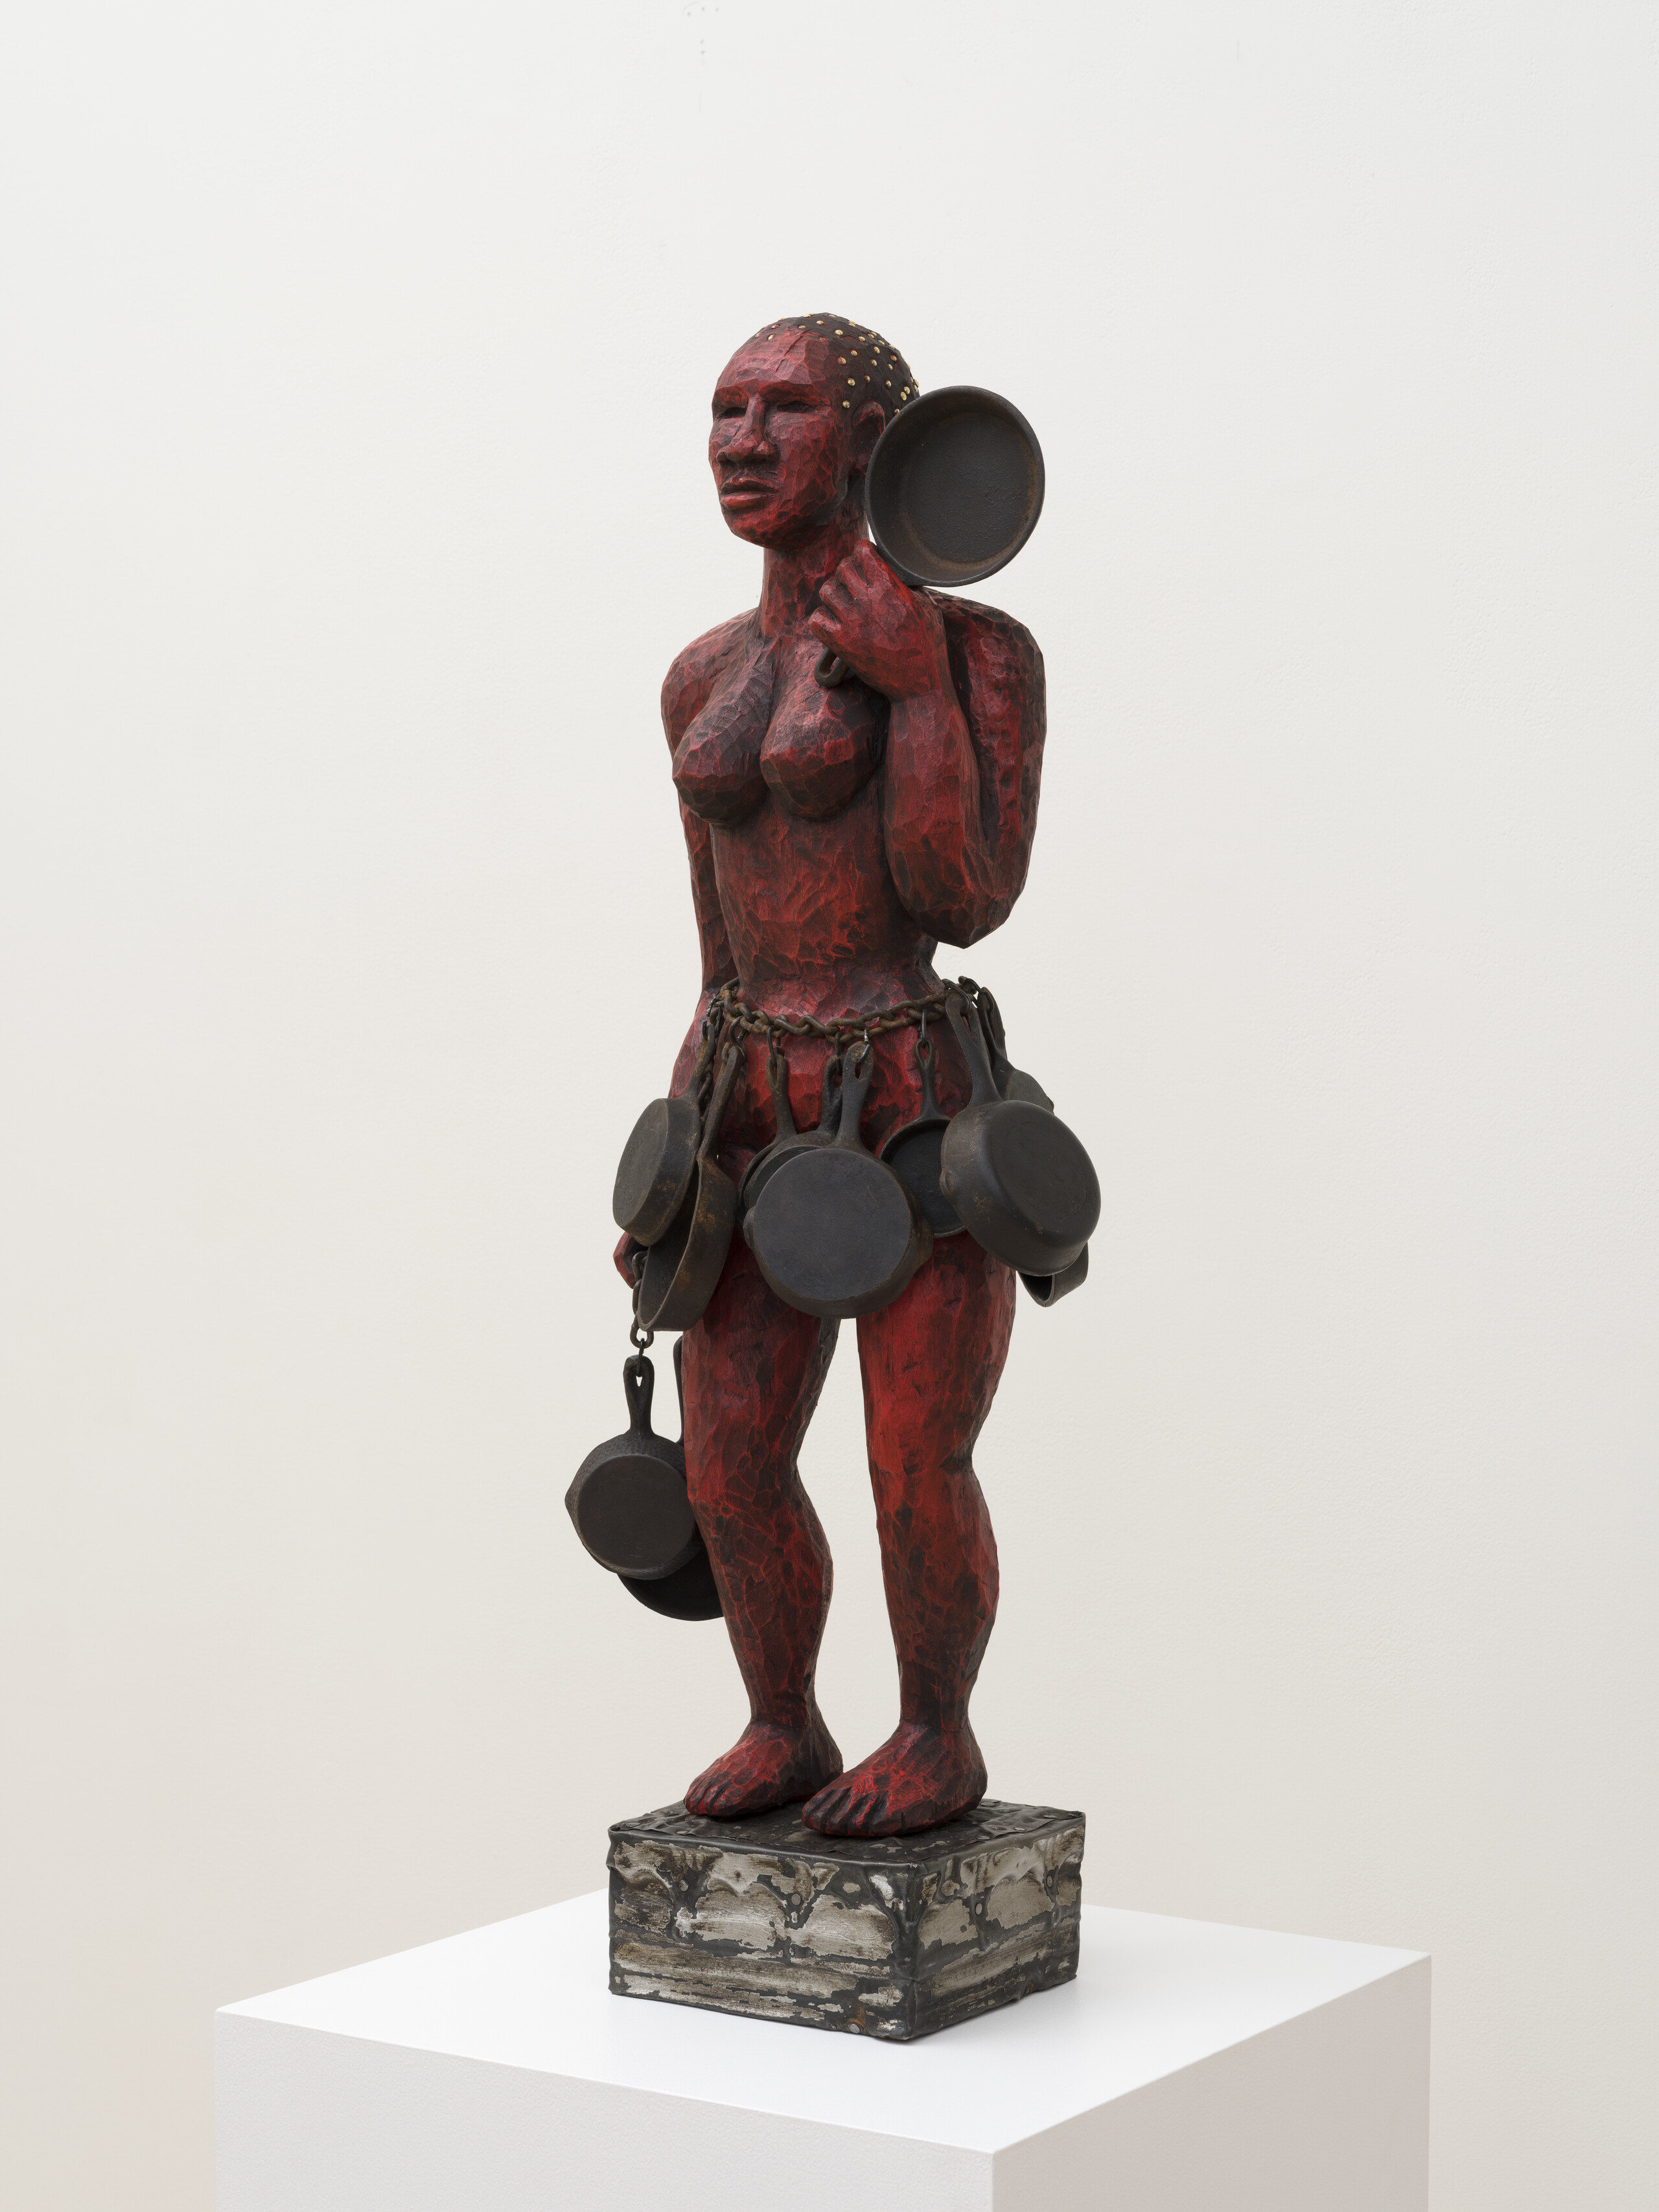 A wooden sculpture is painted red and shaped as a nude woman holding a cast iron skillet in her left hand. She has a heavy chain around her waist with multiple skillets hanging from it like a skirt. She stands on a small wooden platform.